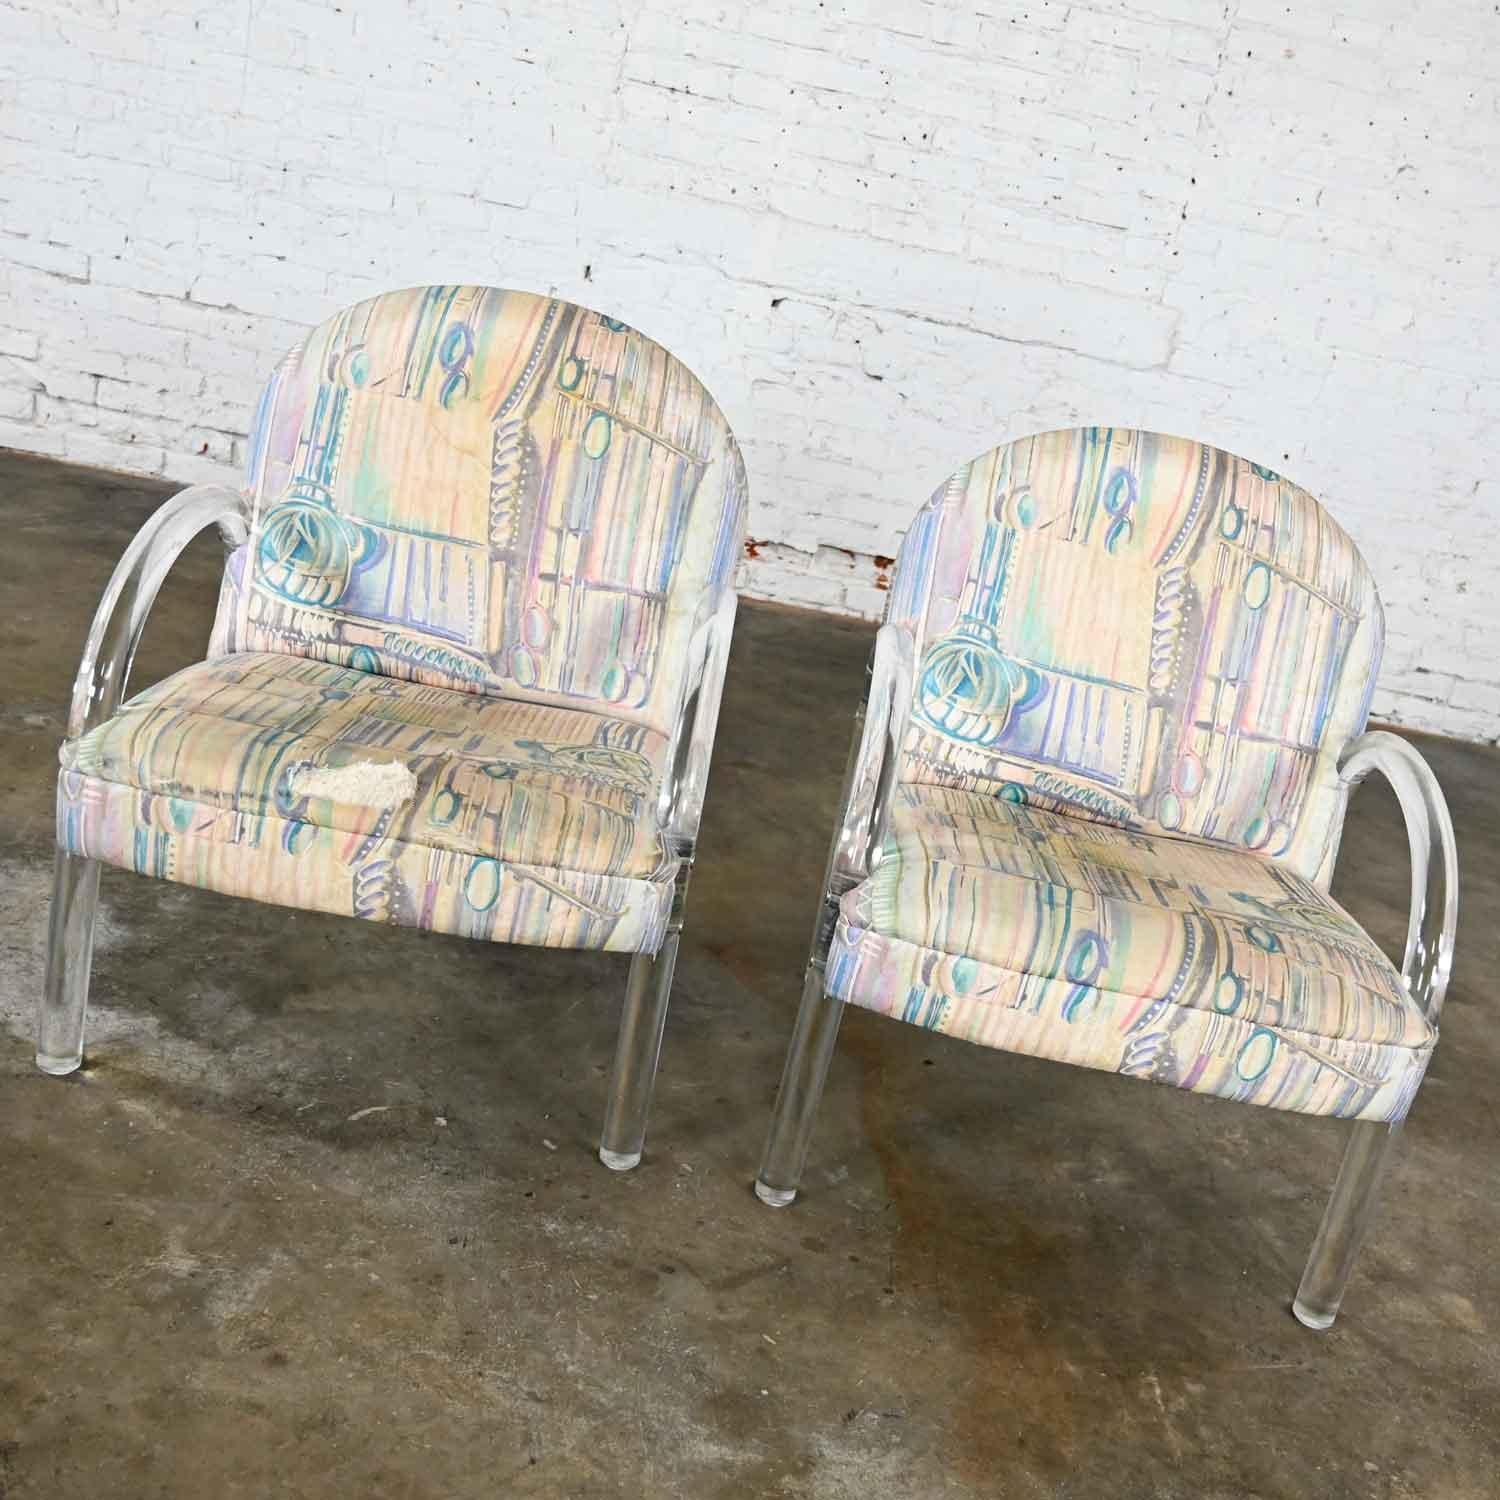 American Modern Lucite Waterfall Side Chairs Attr to Leon Rosen for The Pace Collection